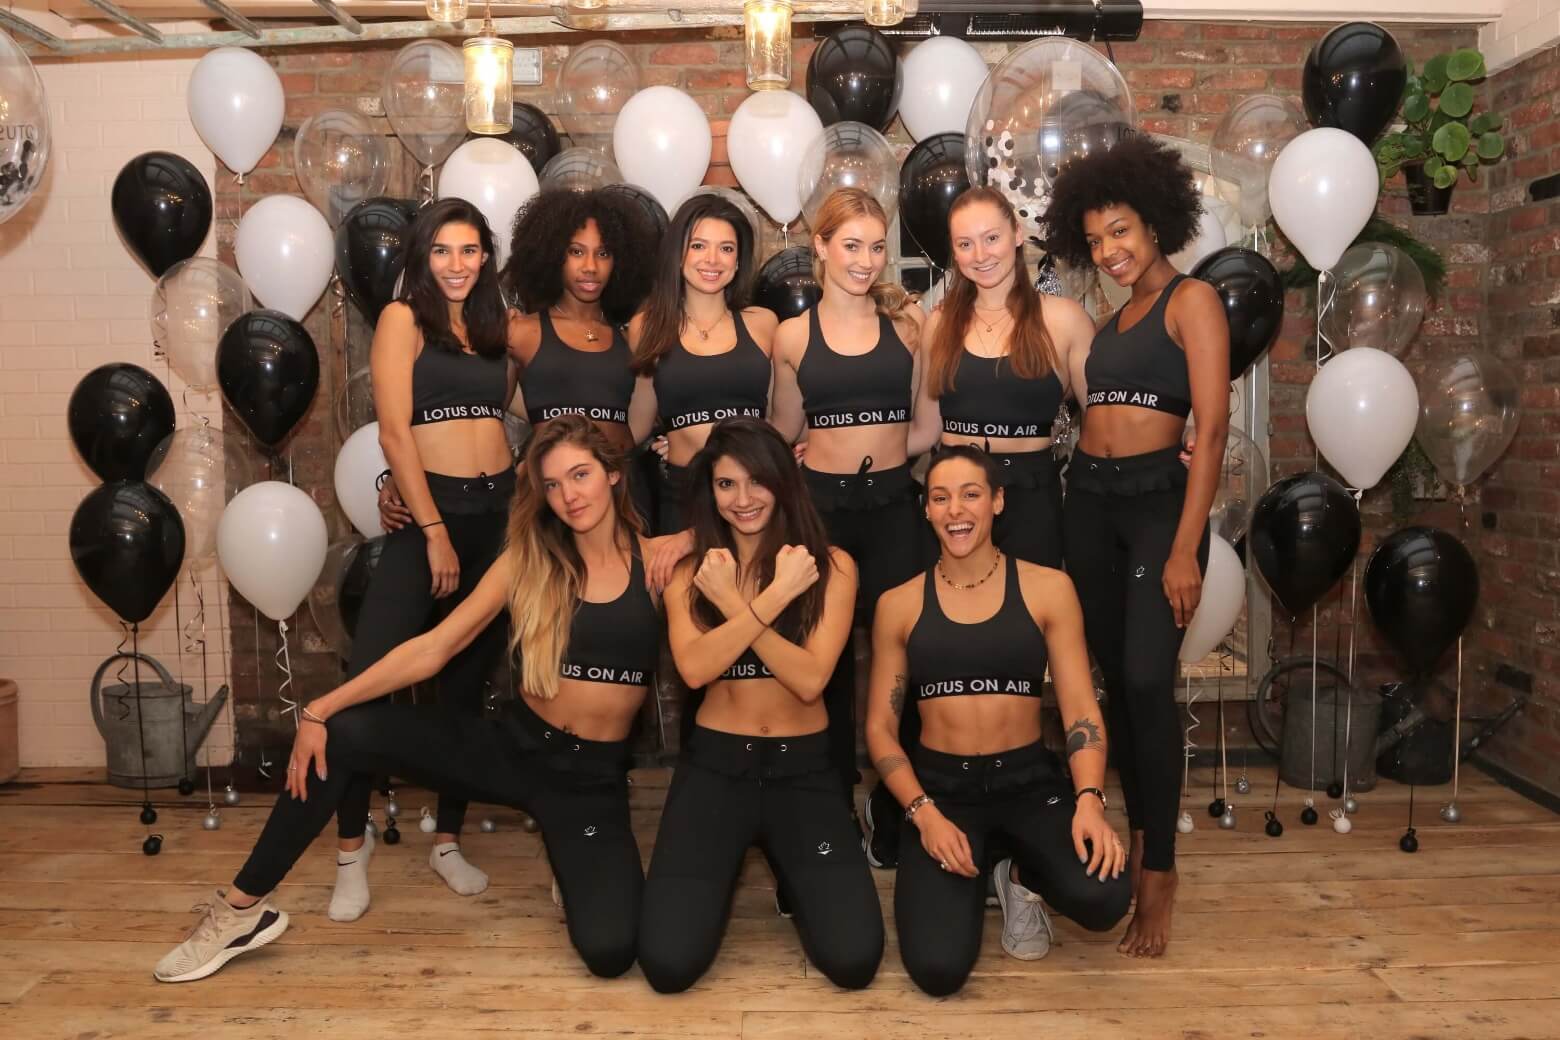 Lotus_On_Air_fashion_fitness_activewear_london_shoreditch_1_2